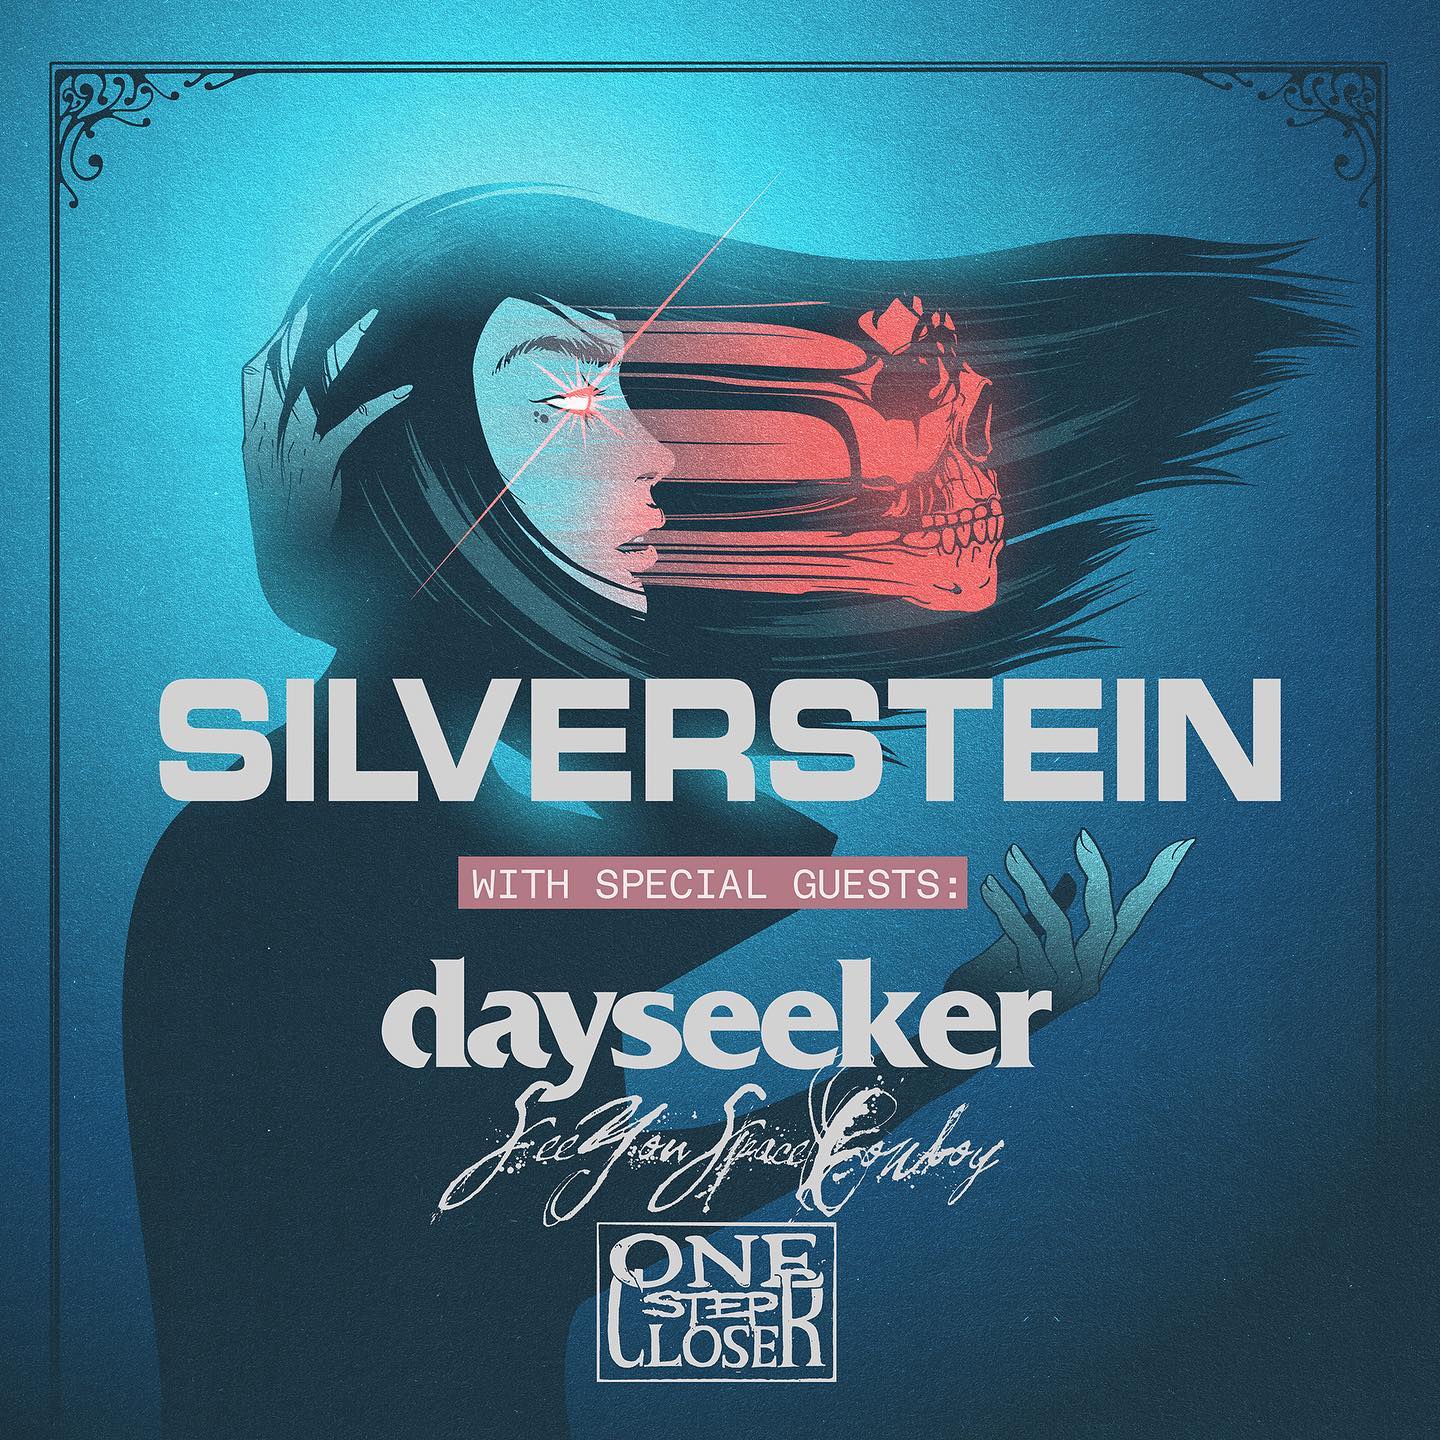 Silverstein with Dayseeker, See You Space Cowboy, and One Step Closer